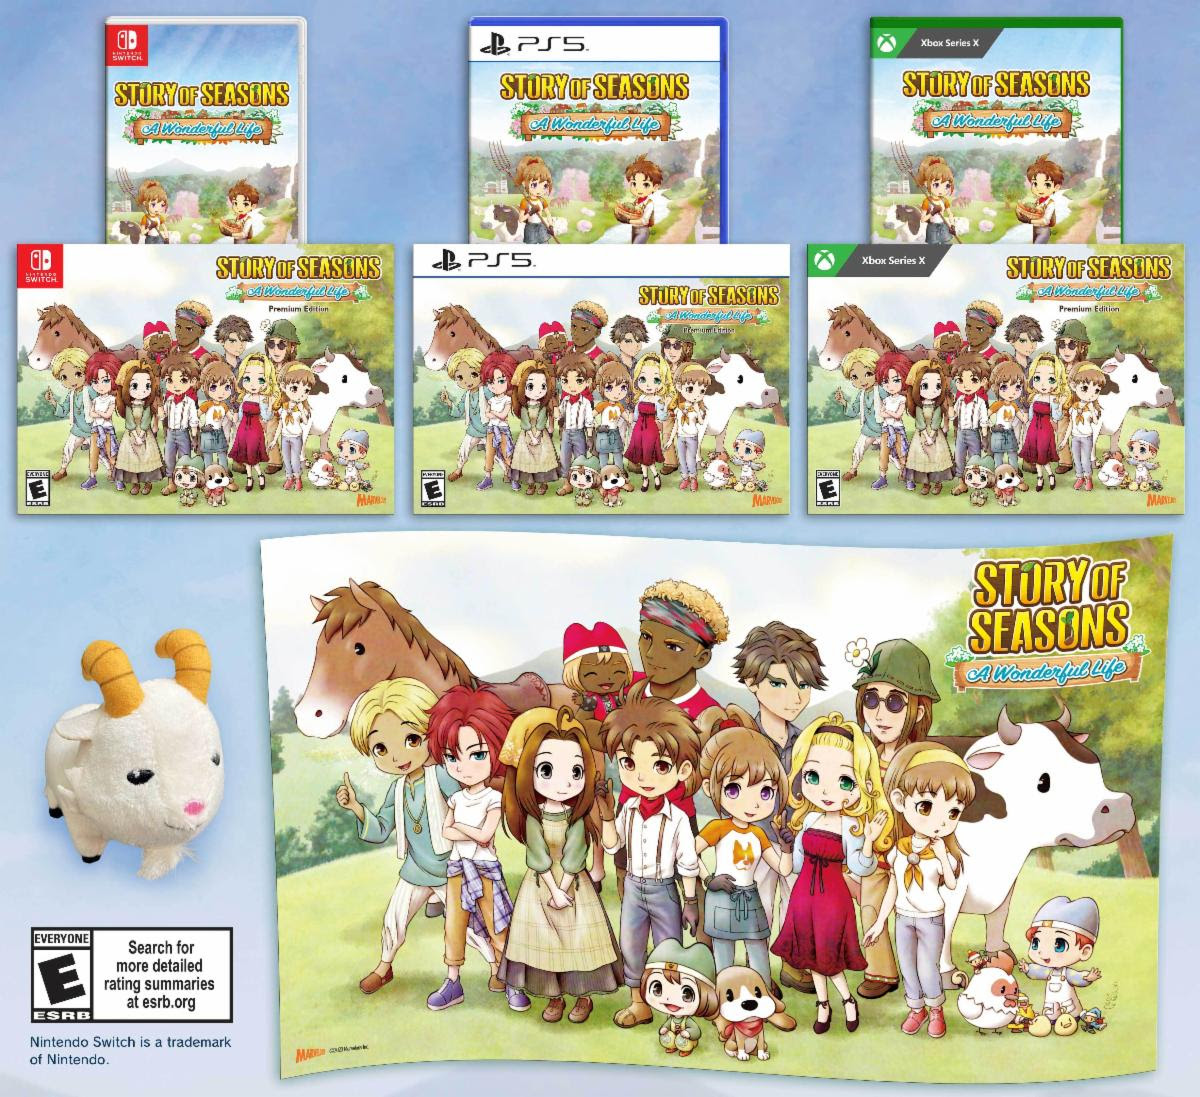 Story of Seasons: A Wonderful Life Release Date Set for June